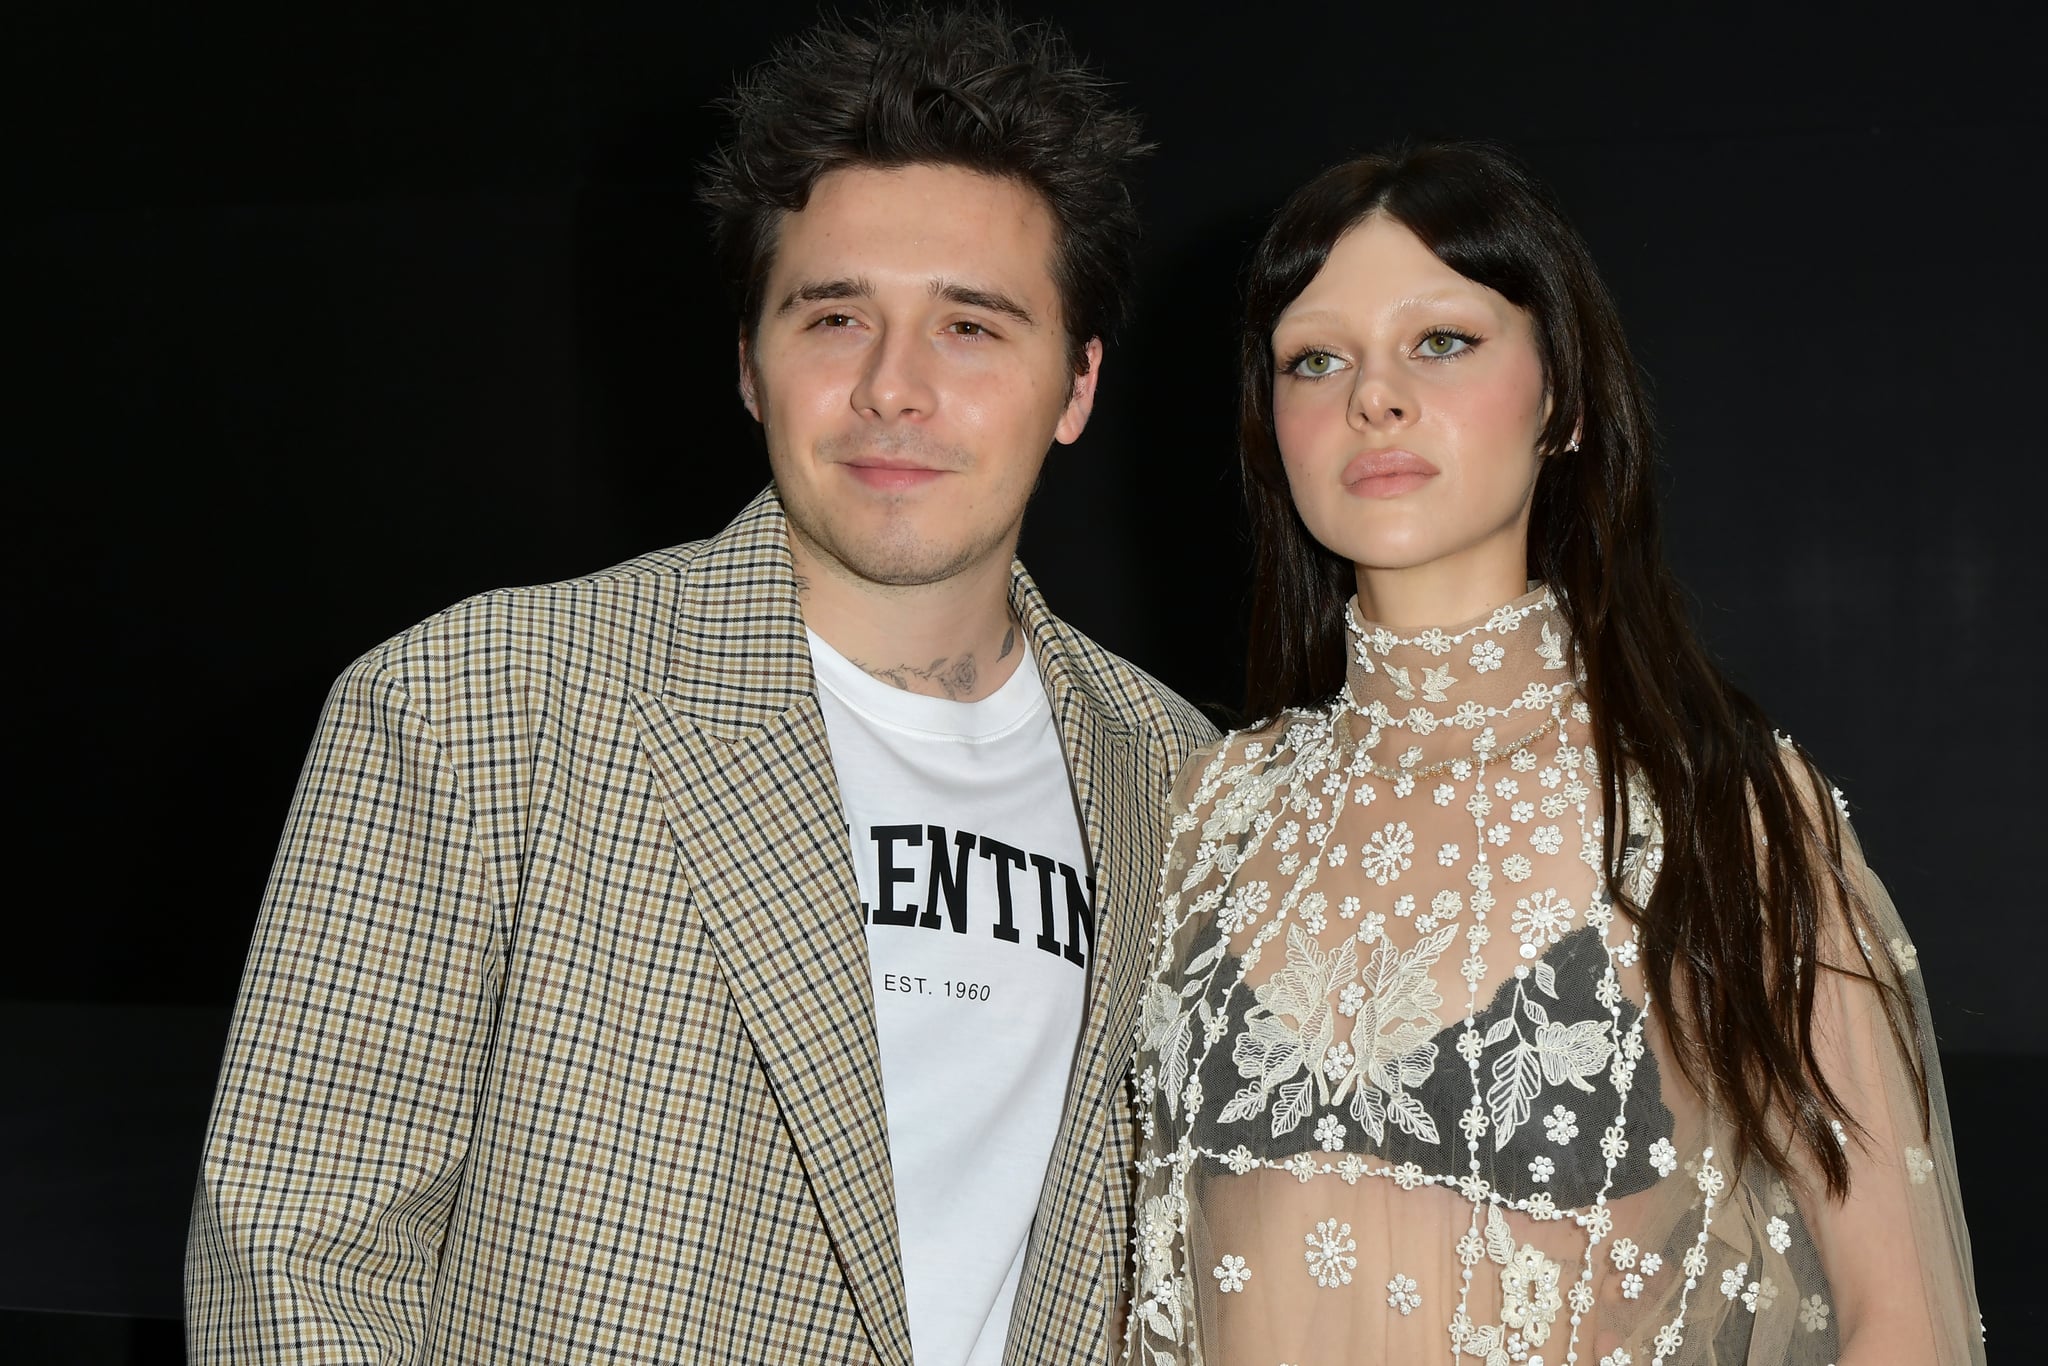 PARIS, FRANCE - OCTOBER 02: (EDITORIAL USE ONLY - For Non-Editorial use please seek approval from Fashion House) Brooklyn Beckham and Nicola Peltz Beckham attend the Valentino Womenswear Spring/Summer 2023 show as part of Paris Fashion Week  on October 02, 2022 in Paris, France. (Photo by Dominique Charriau/WireImage)